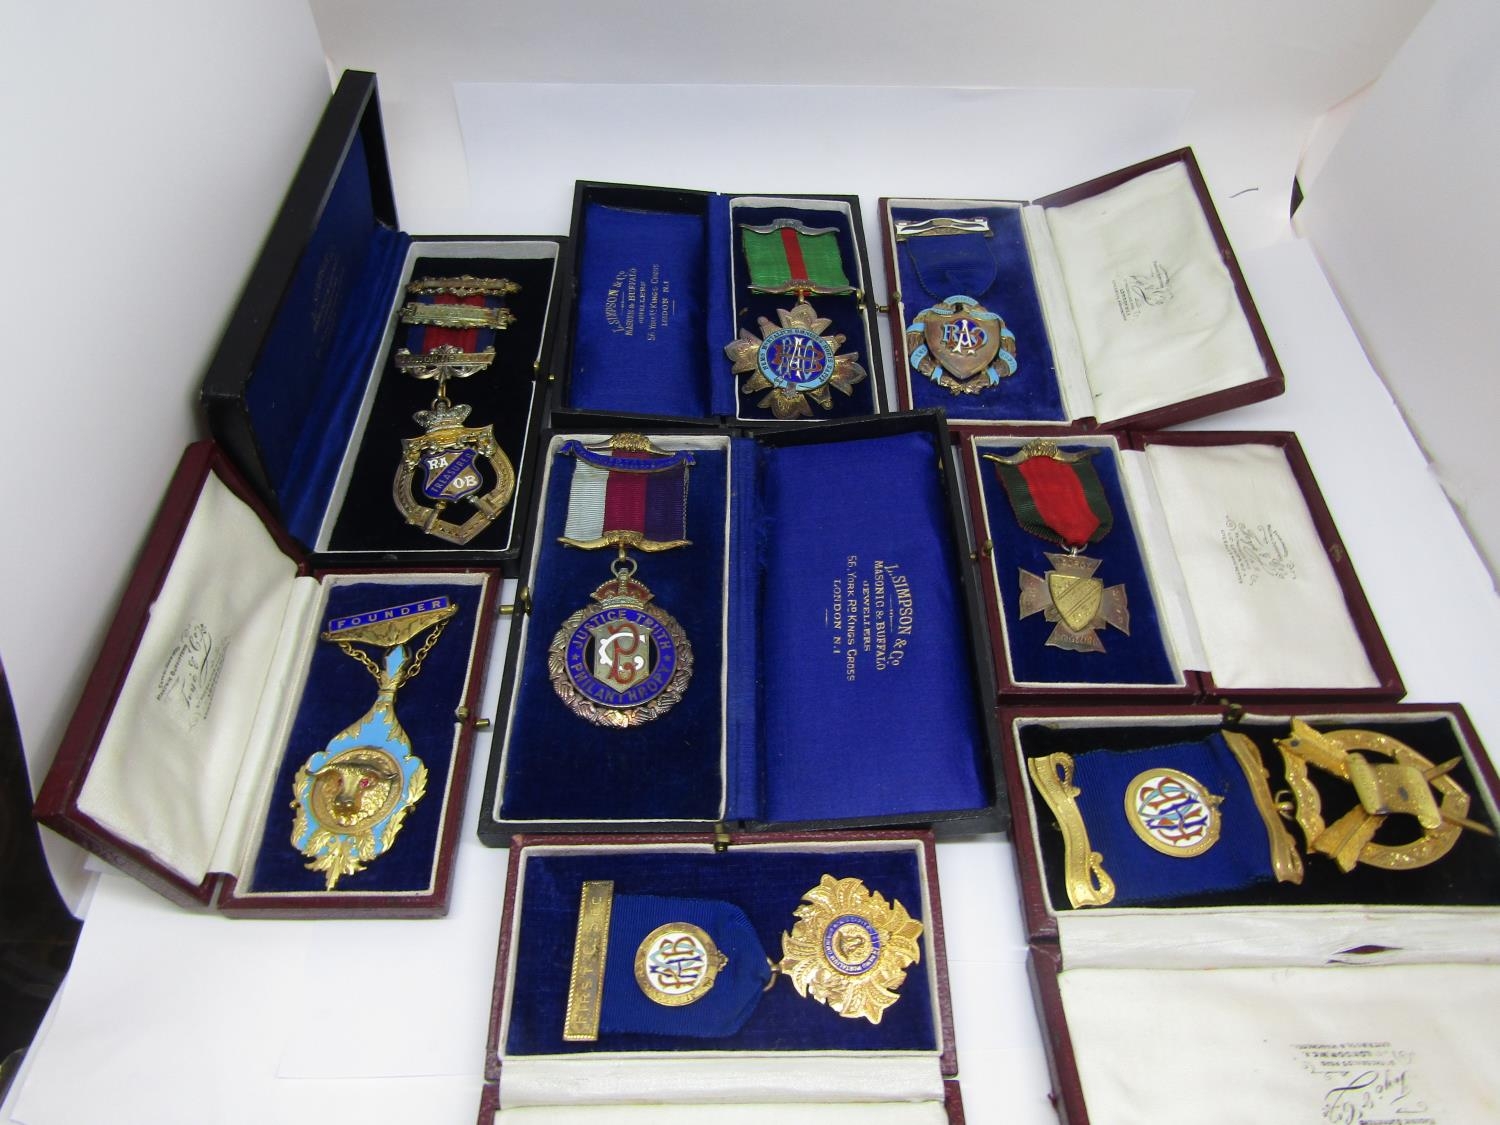 Eight cased silver Royal Antediluvian Order of Buffaloes medals, presented to Sir Augustus George